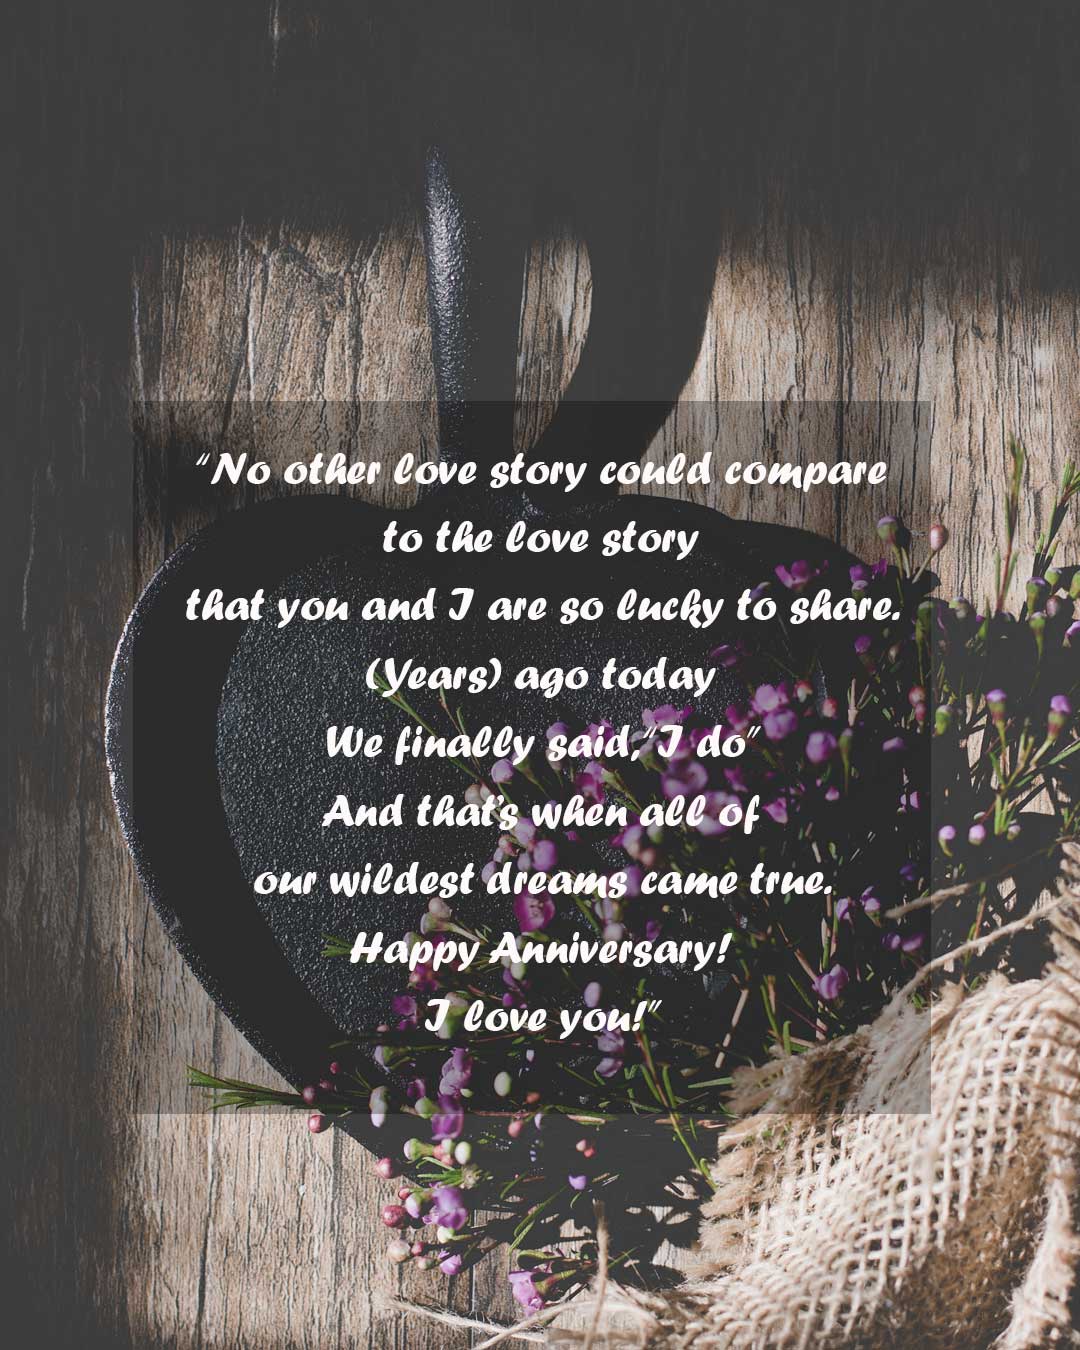 Marriage anniversary poems for wife